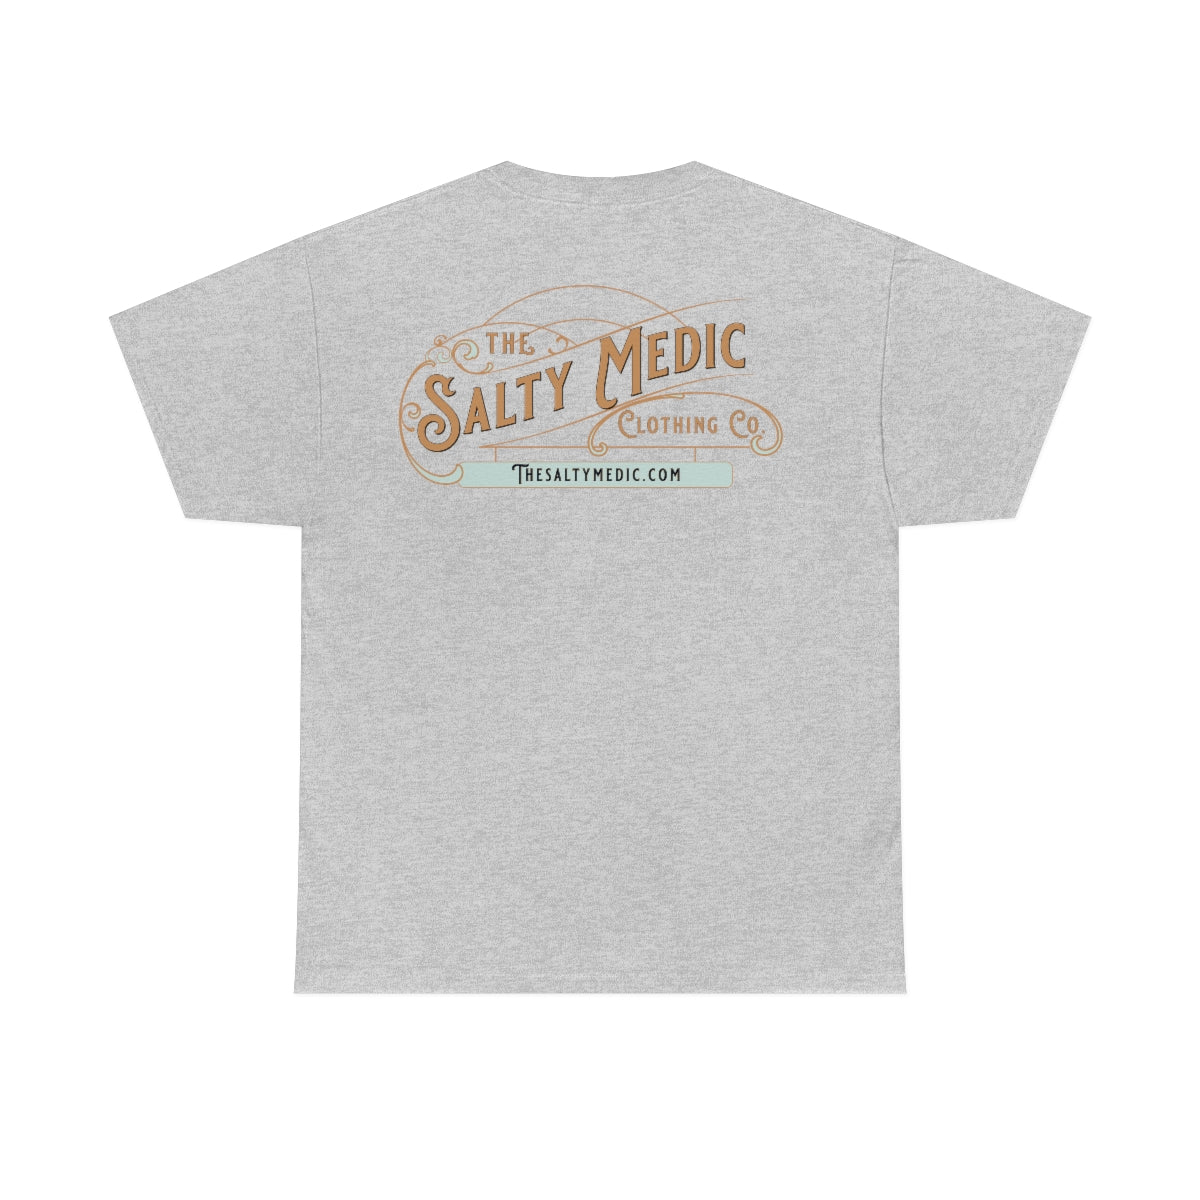 Salty Medic Workin' On My 6 PackHeavy Cotton Tee - Salty Medic Clothing Co.